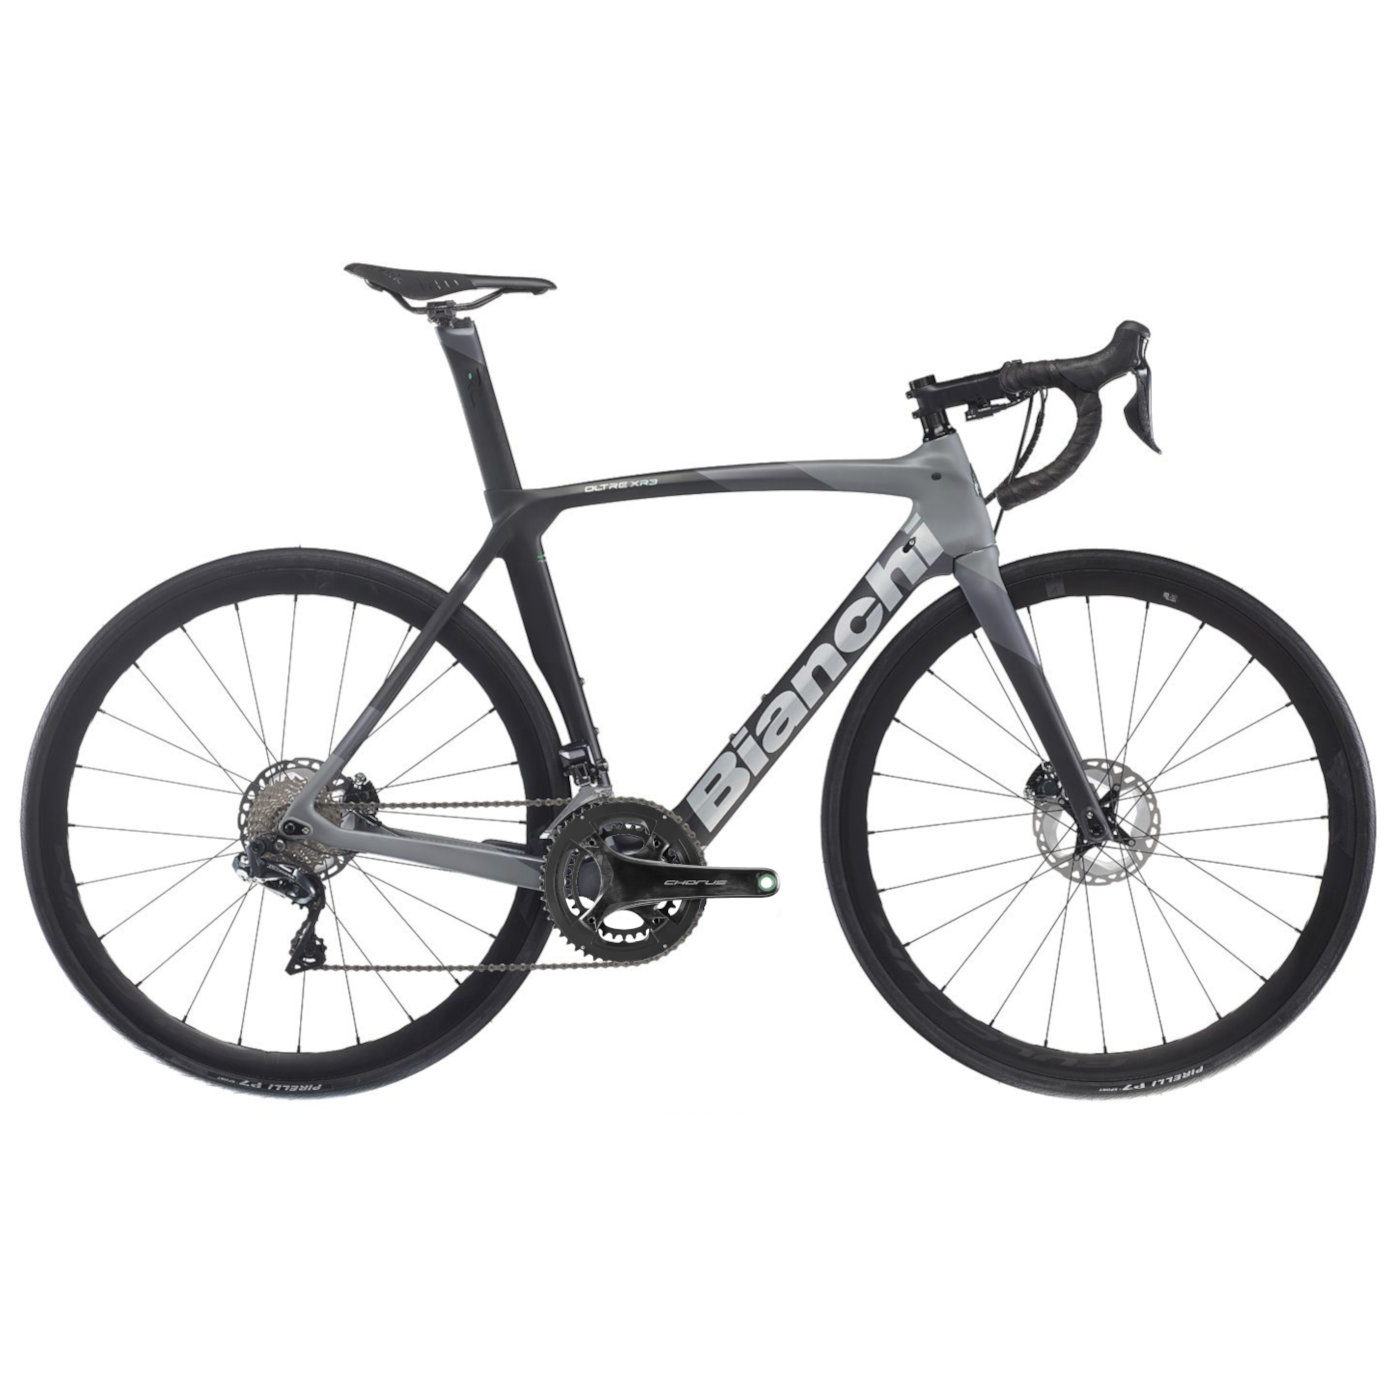 Picture of Bianchi OLTRE XR3 Disc - Chorus - Carbon Roadbike - 2023 - graphite / grey shade / metall mirror